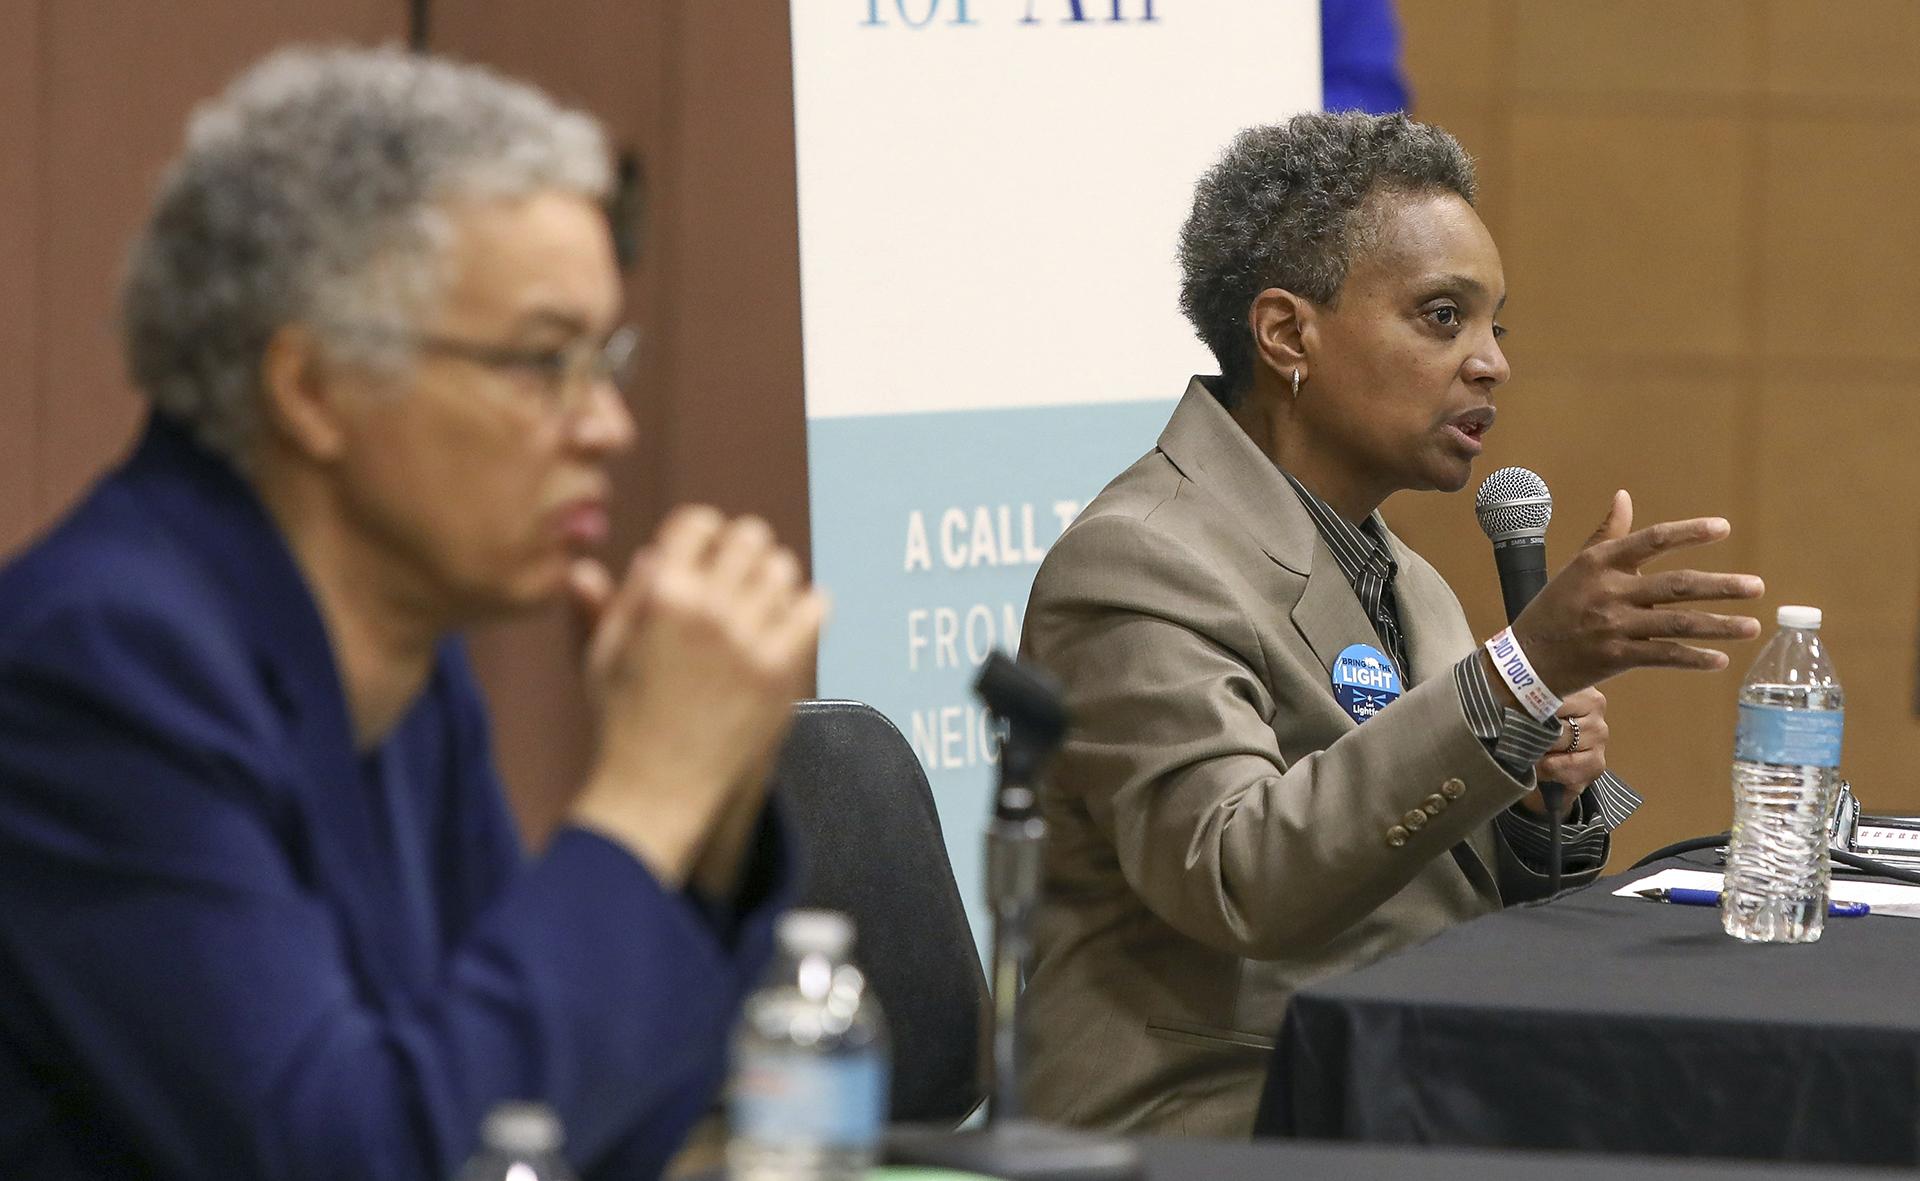 In this March 24, 2019 photo, Chicago mayoral candidate Lori Lightfoot, right, participates in a candidate forum sponsored by One Chicago For All Alliance at Daley College in Chicago. (AP Photo / Teresa Crawford)